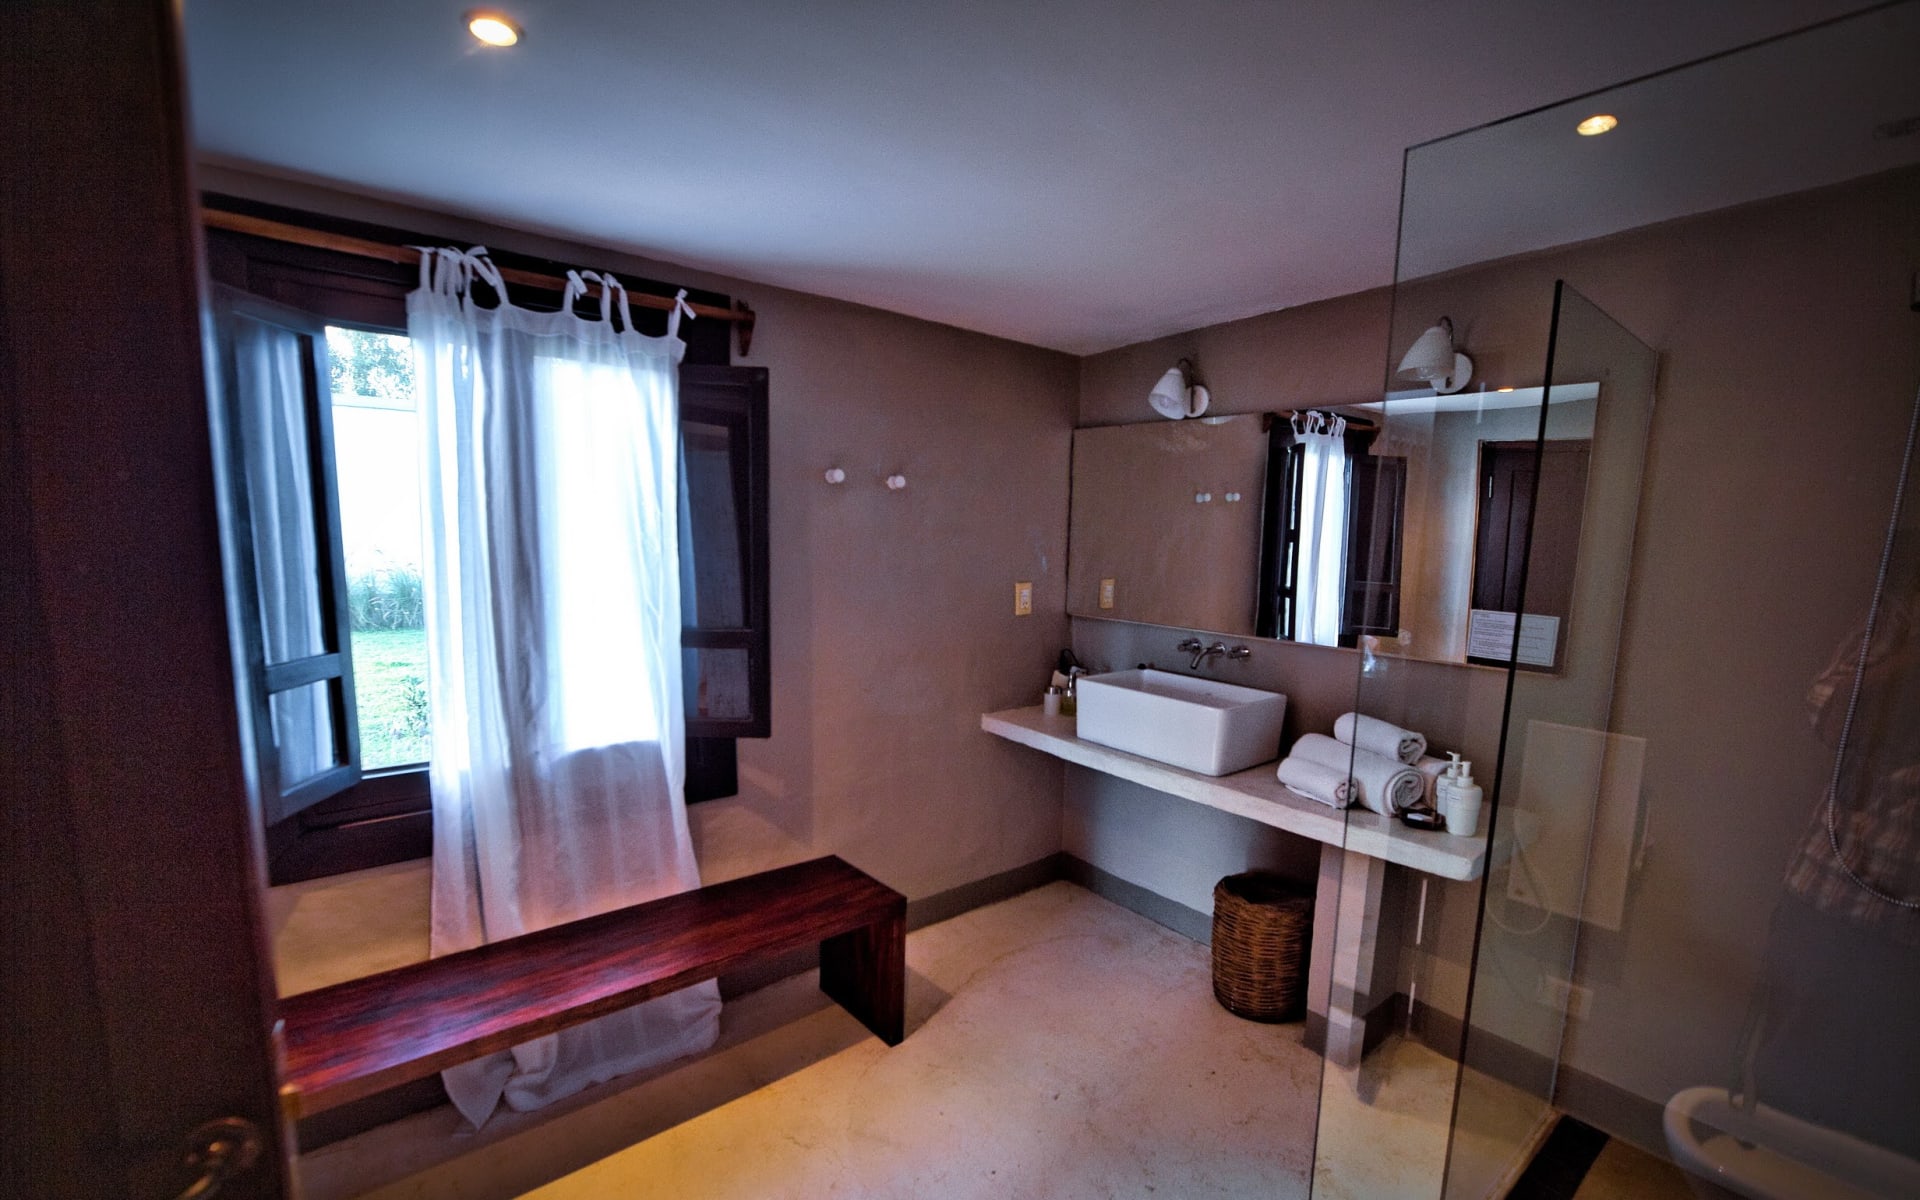 The bathrooms at Finca Valentina are spacious, with a bench, a walk-in shower and a sink with towels and a mirror.